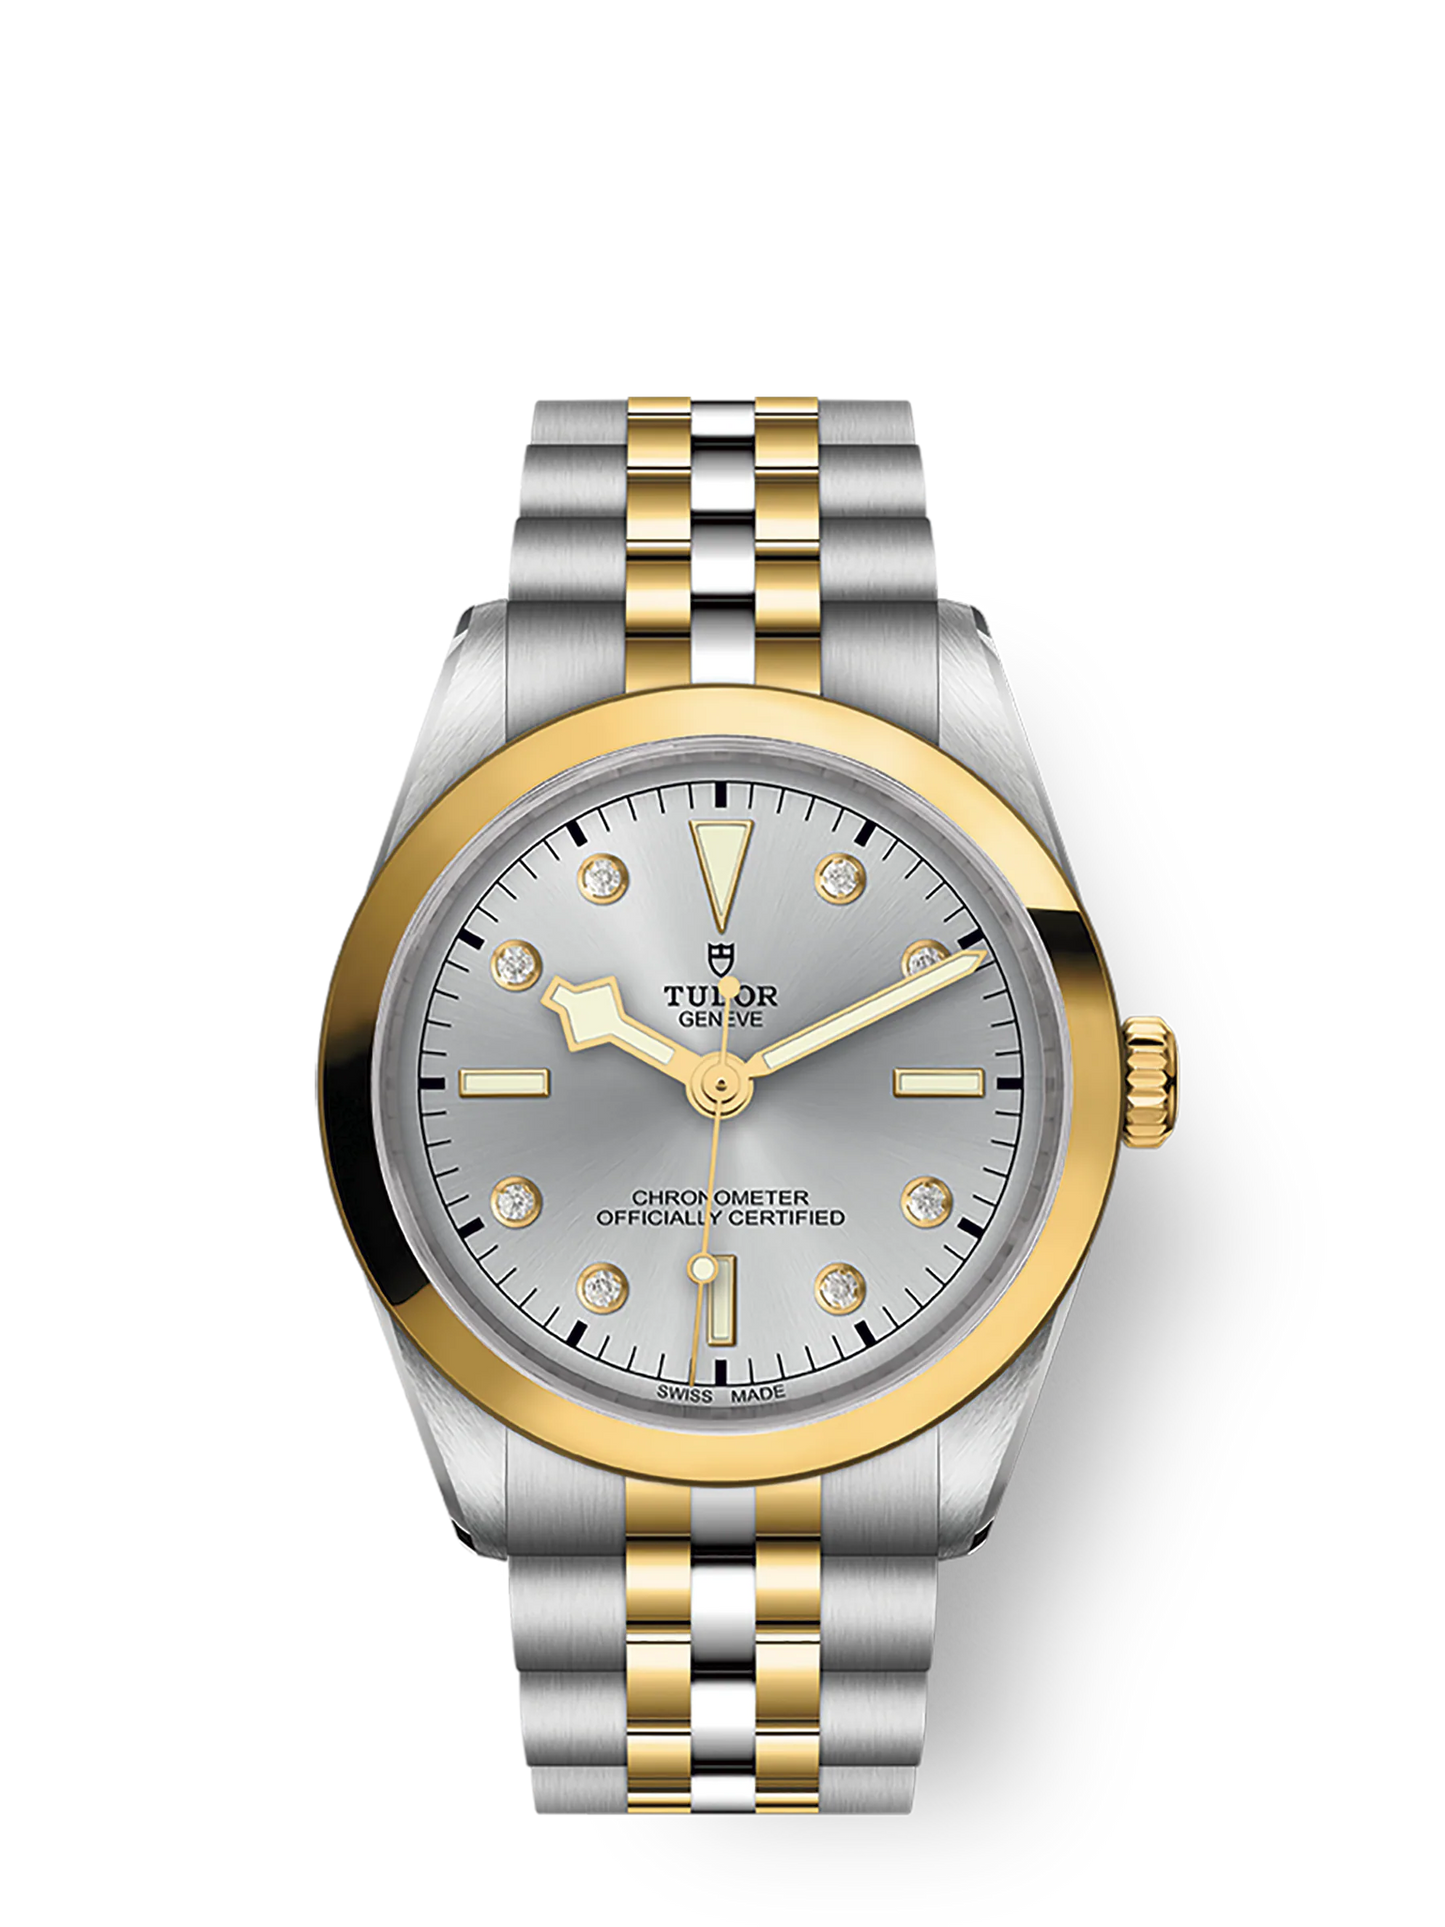 Tudor Black Bay 36 S&G, 316L Stainless Steel and 18k Yellow Gold, Ref# M79643-0007